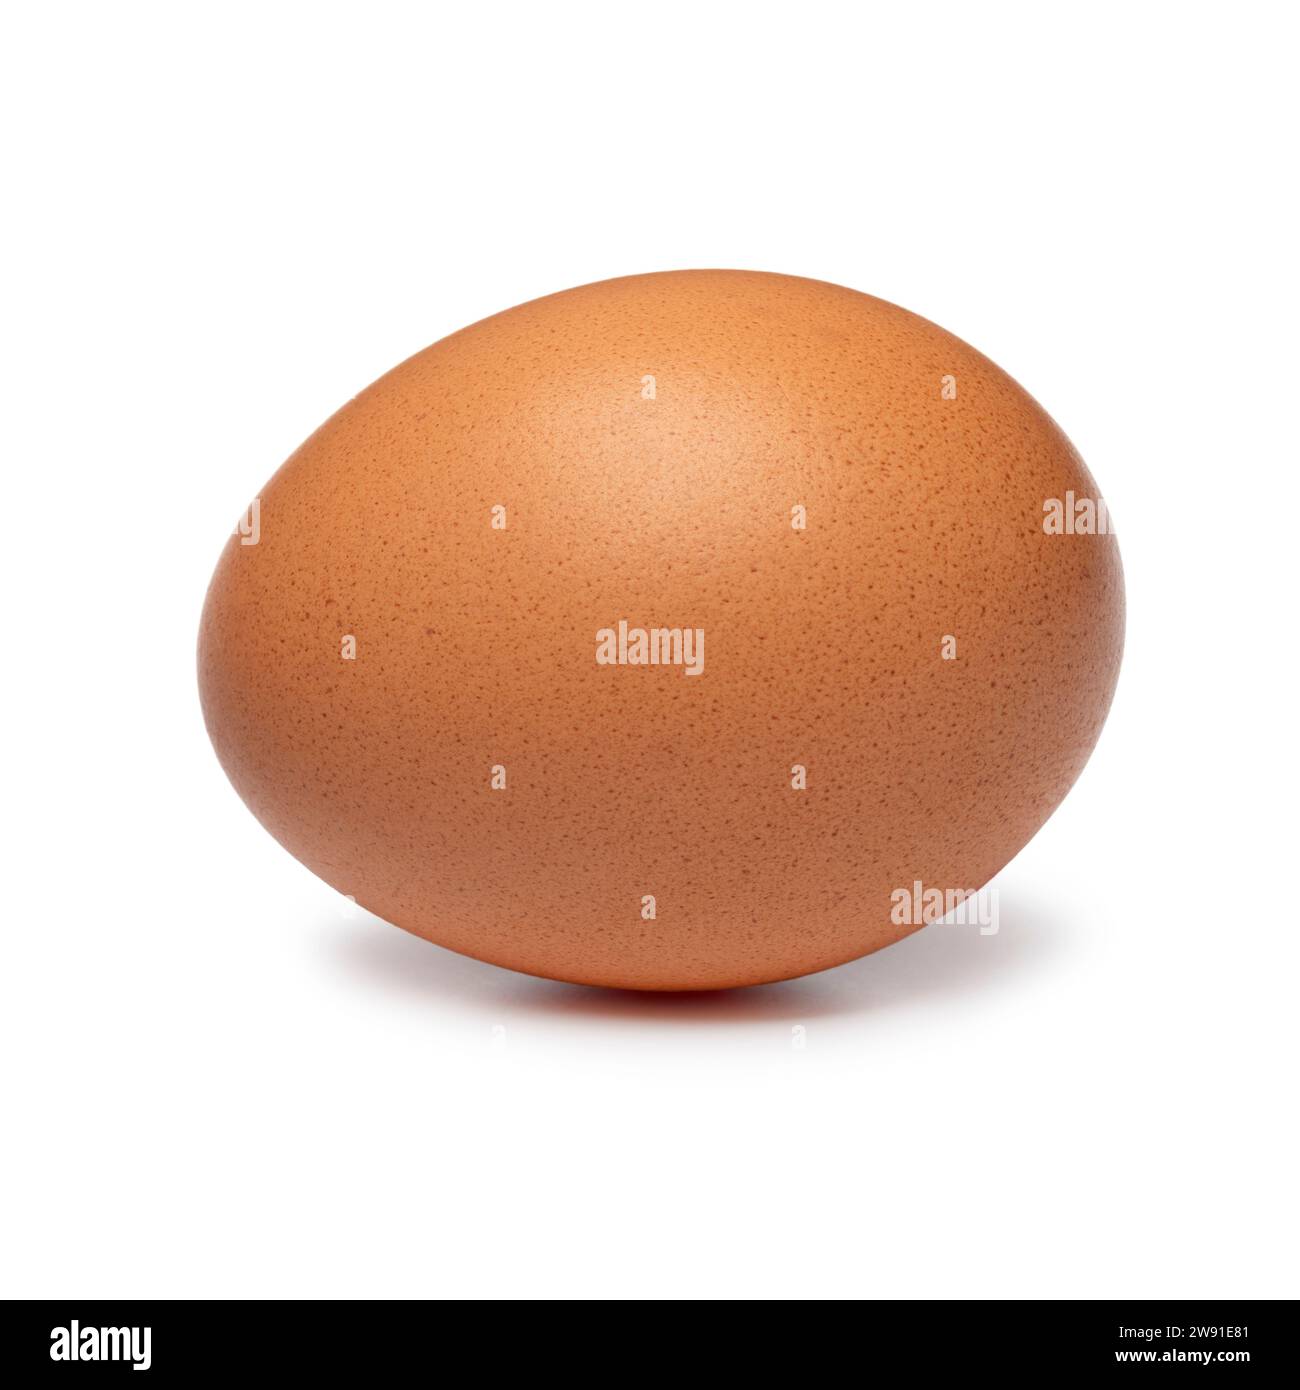 Single fresh raw brown chicken egg isolated on white background close up Stock Photo